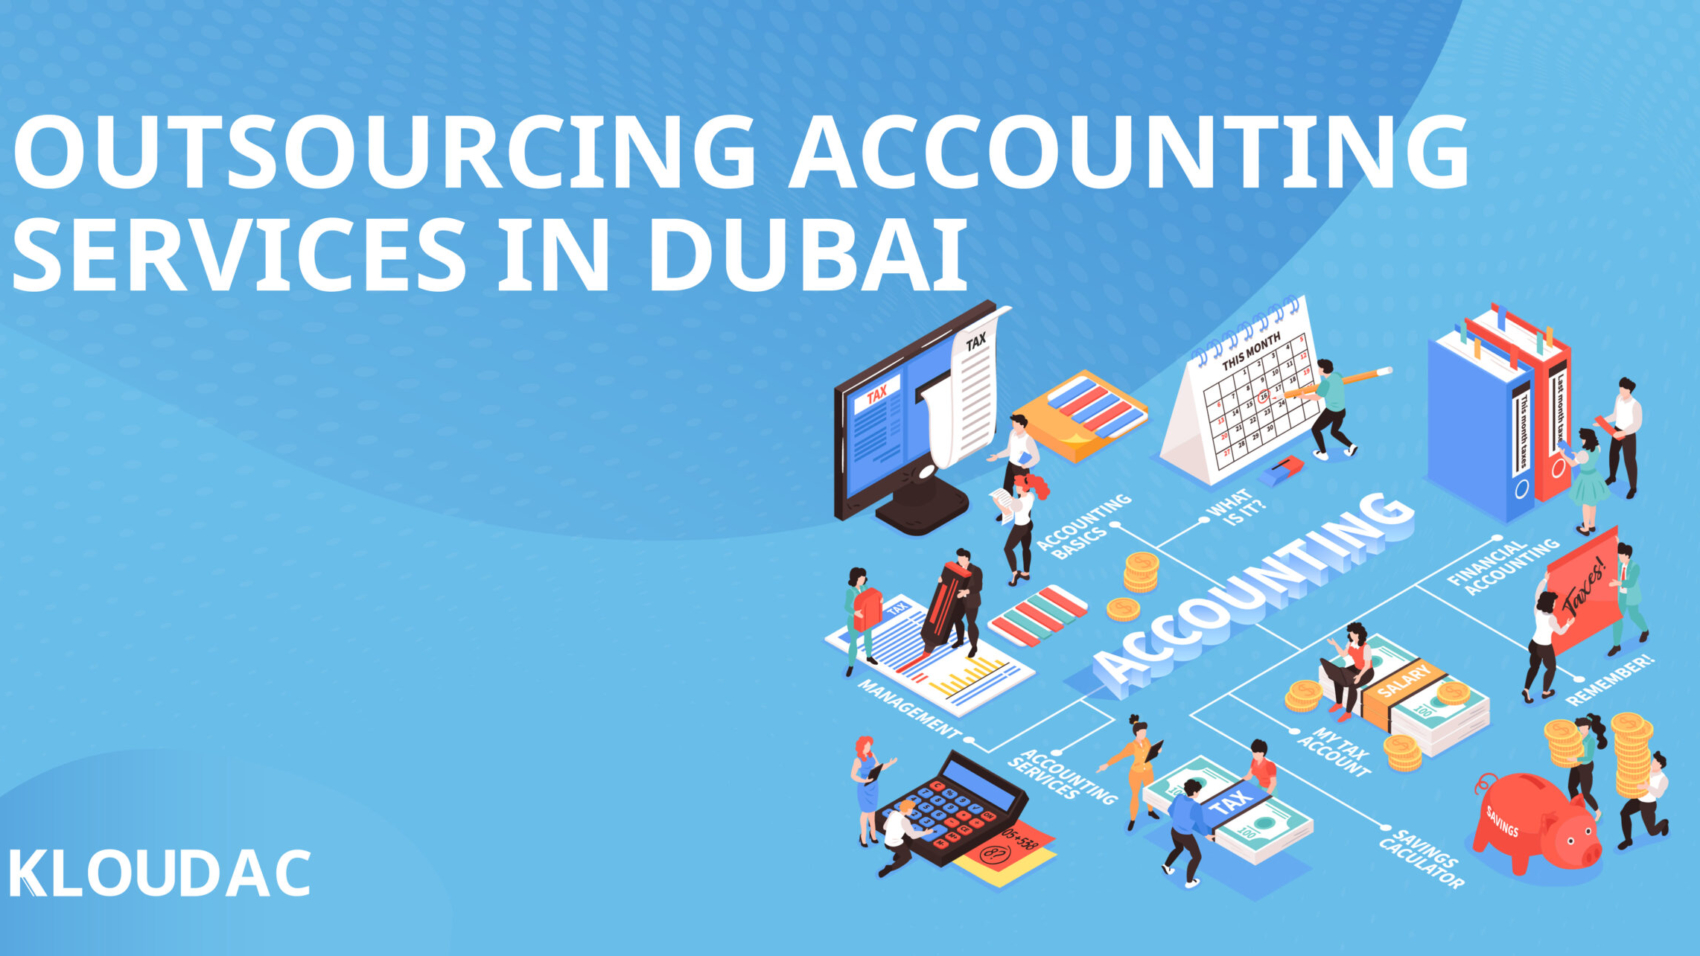 Outsourcing accounting services in dubai